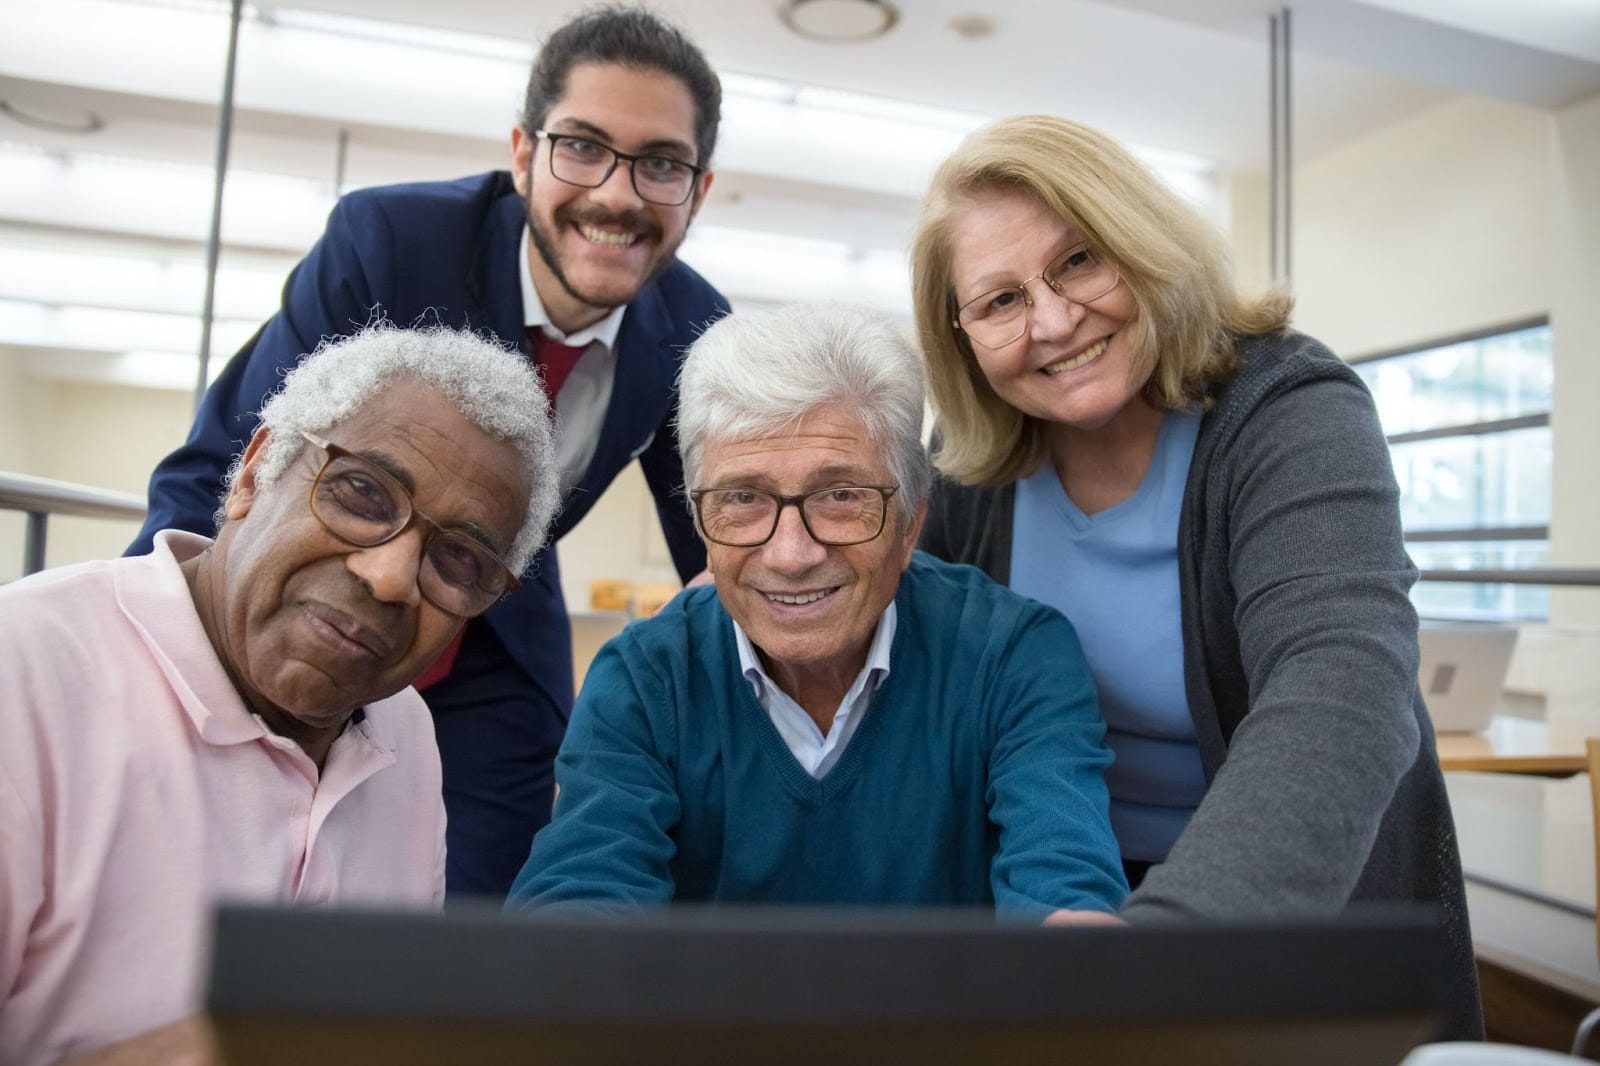 A group of seniors and a young man in a suit smiling behind a computer